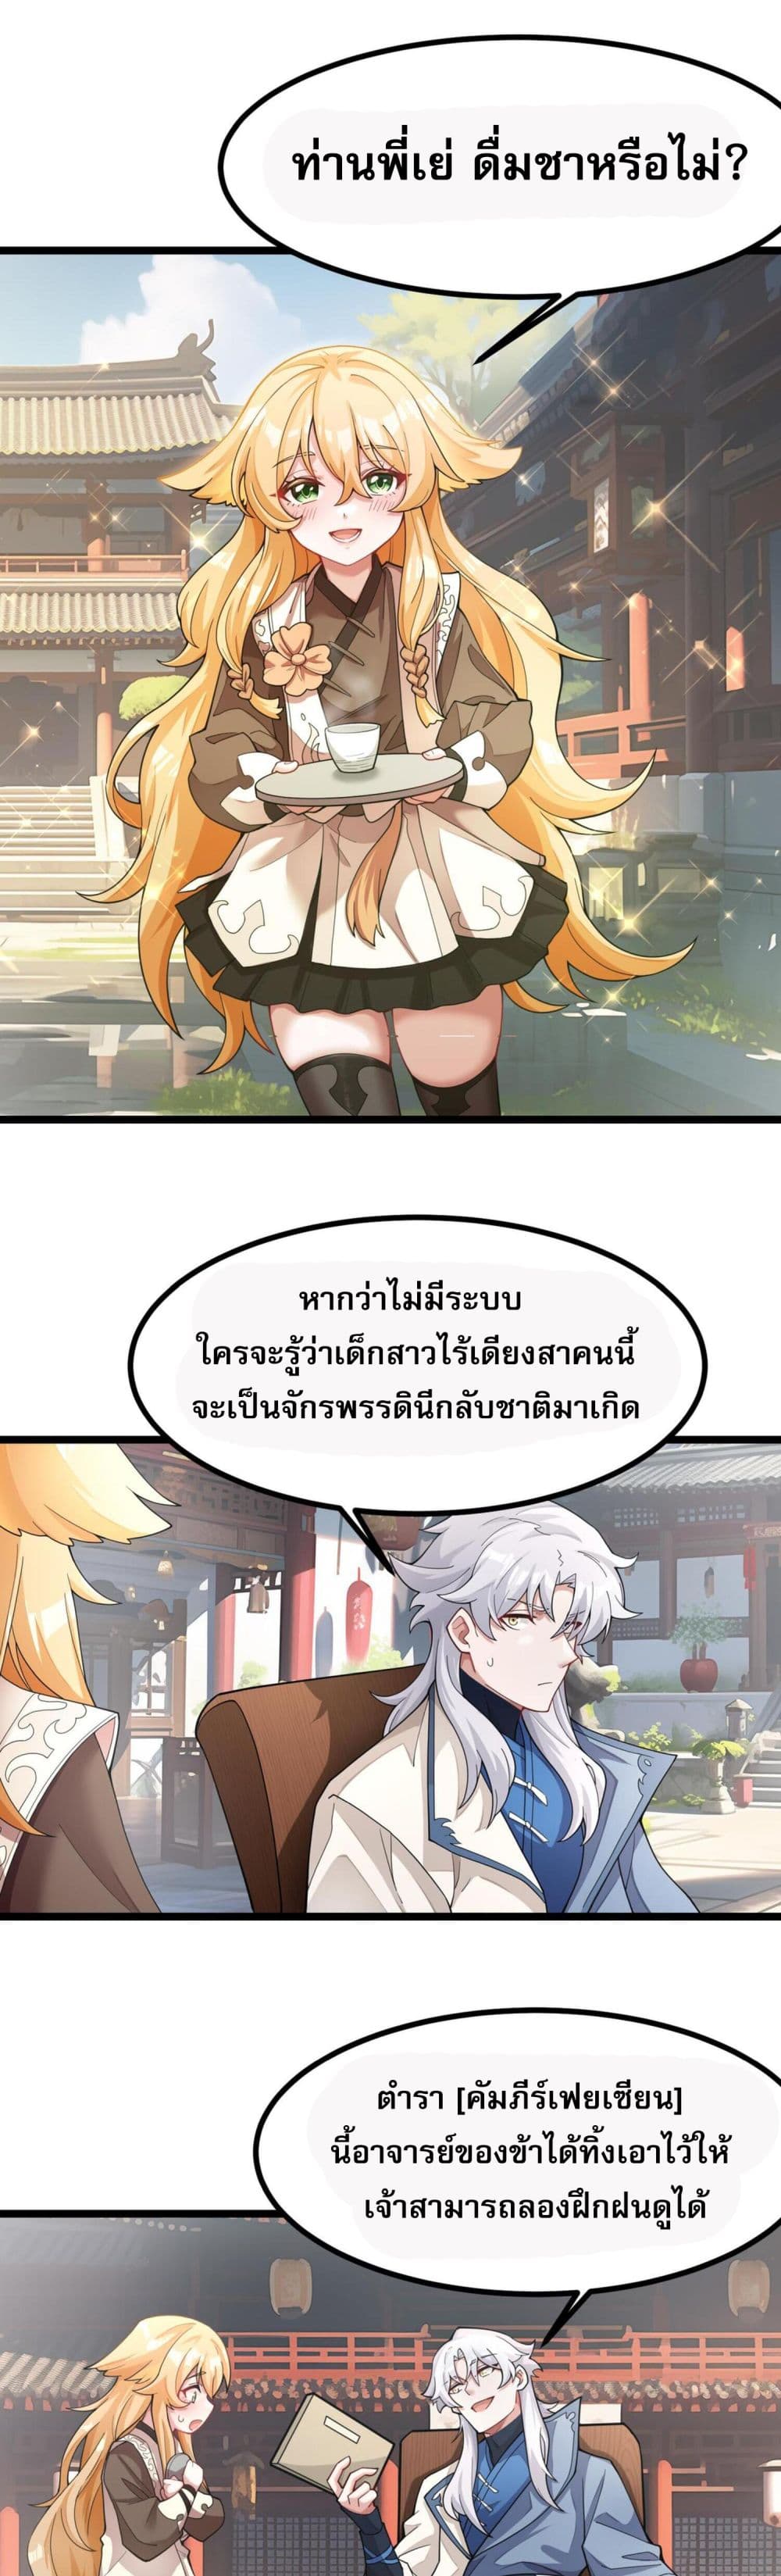 I Have Hundreds of Millions of Years of Cultivation ข้ามีพลังบำเพ็ญหนึ่งล้านปี 3-3